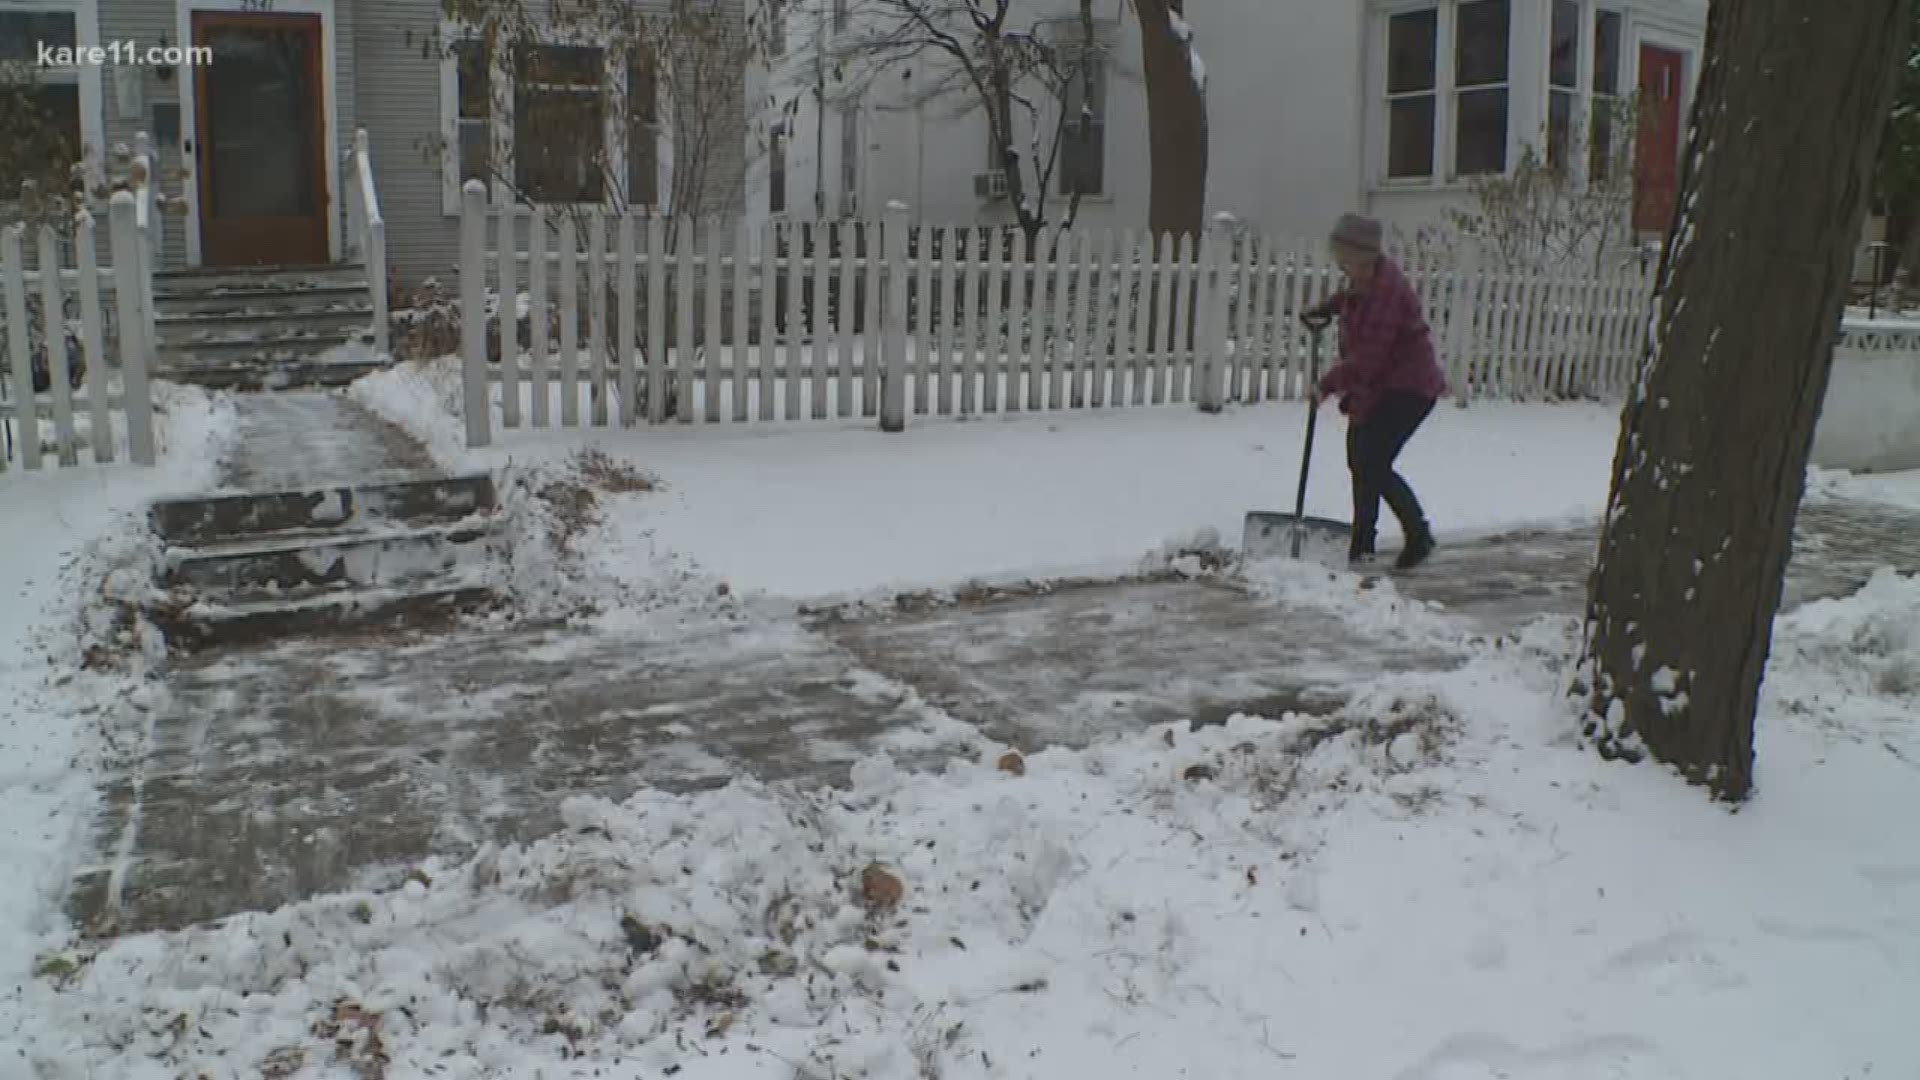 While some Minnesotans are letting Mother Nature melt the snow for them…others are breaking out their shovels.